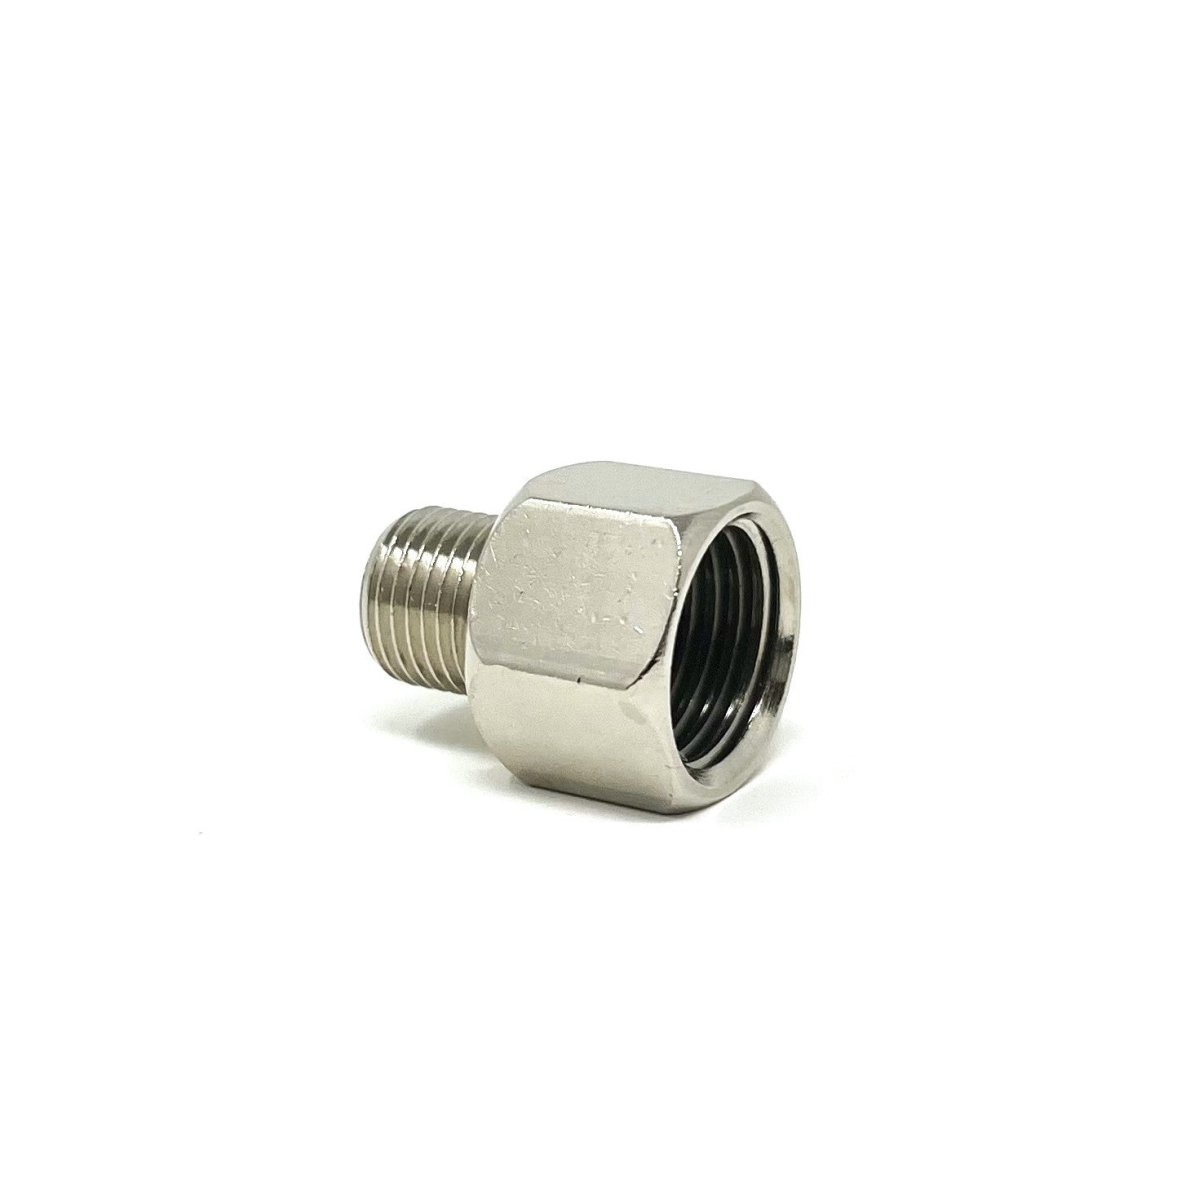 Clearance - Sparmax 1/4 Female to 1/8 Male Adapter - The Merri Artist - merriartist.com